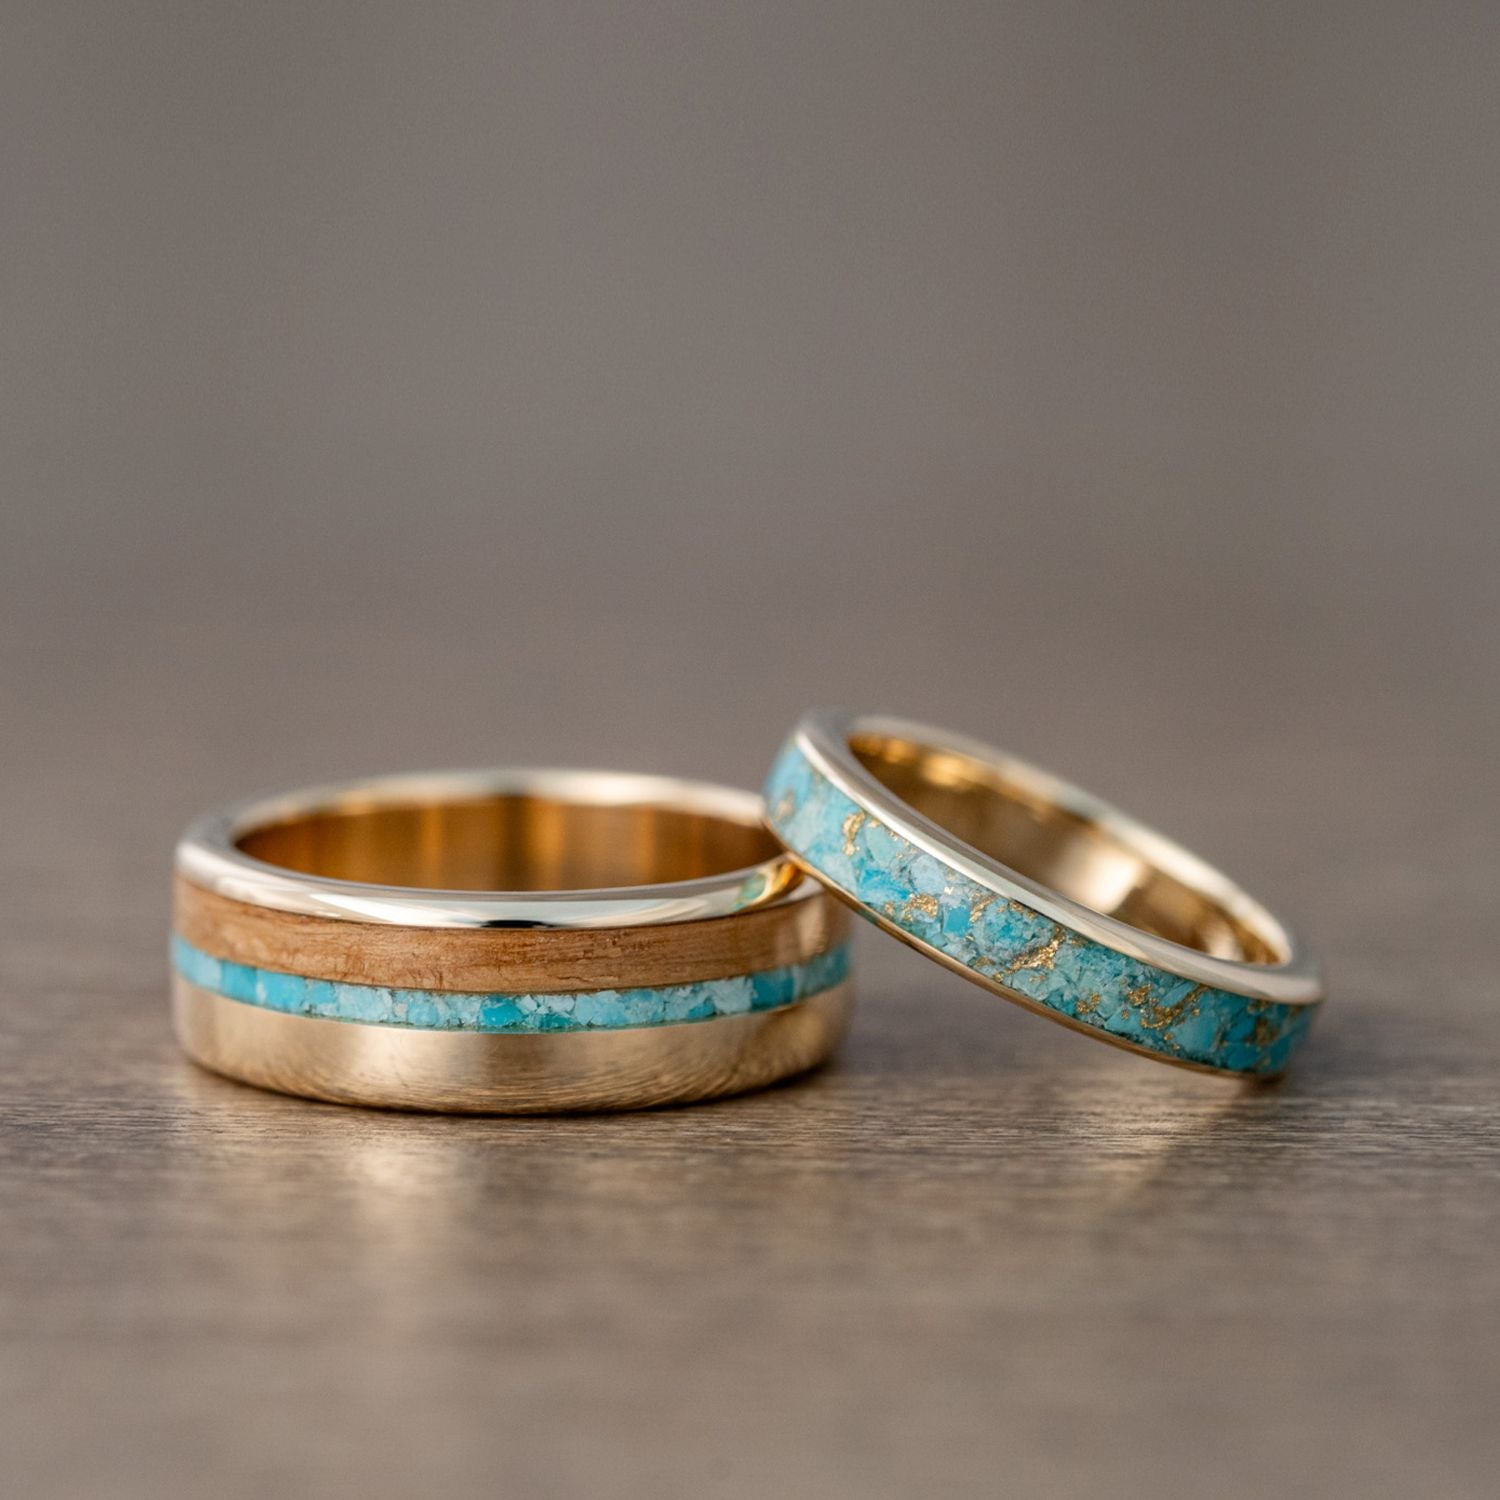 zoete smaak Ordelijk Roux The Reeves & Phoenix - Gold and Turquoise Wedding Ring Set – Rustic and Main